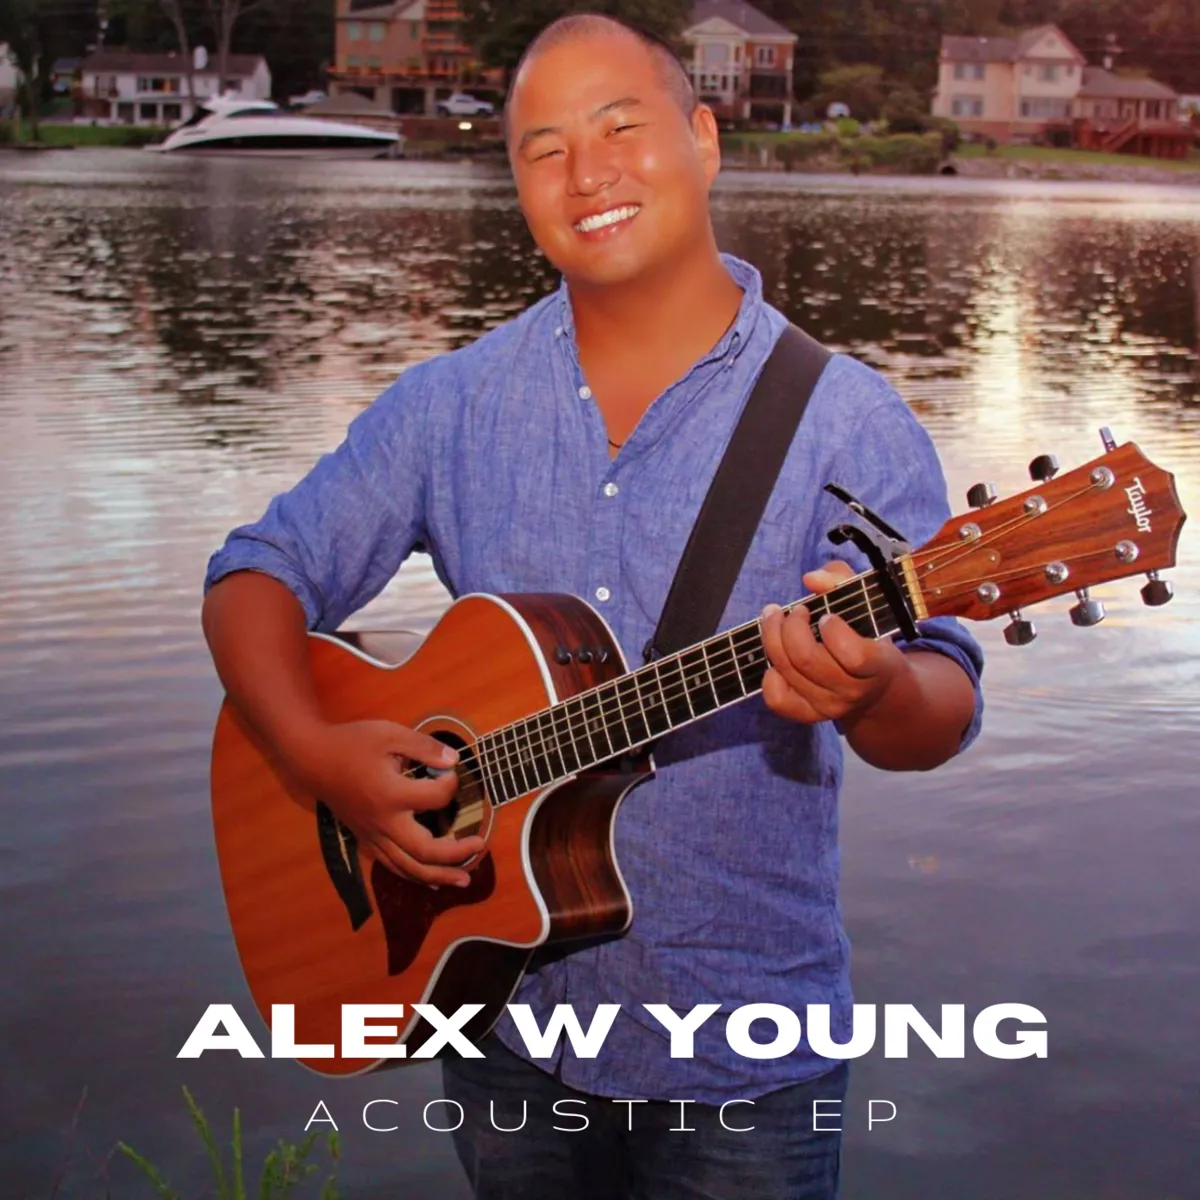 Alex W Young (Acoustic EP) - Physical CD